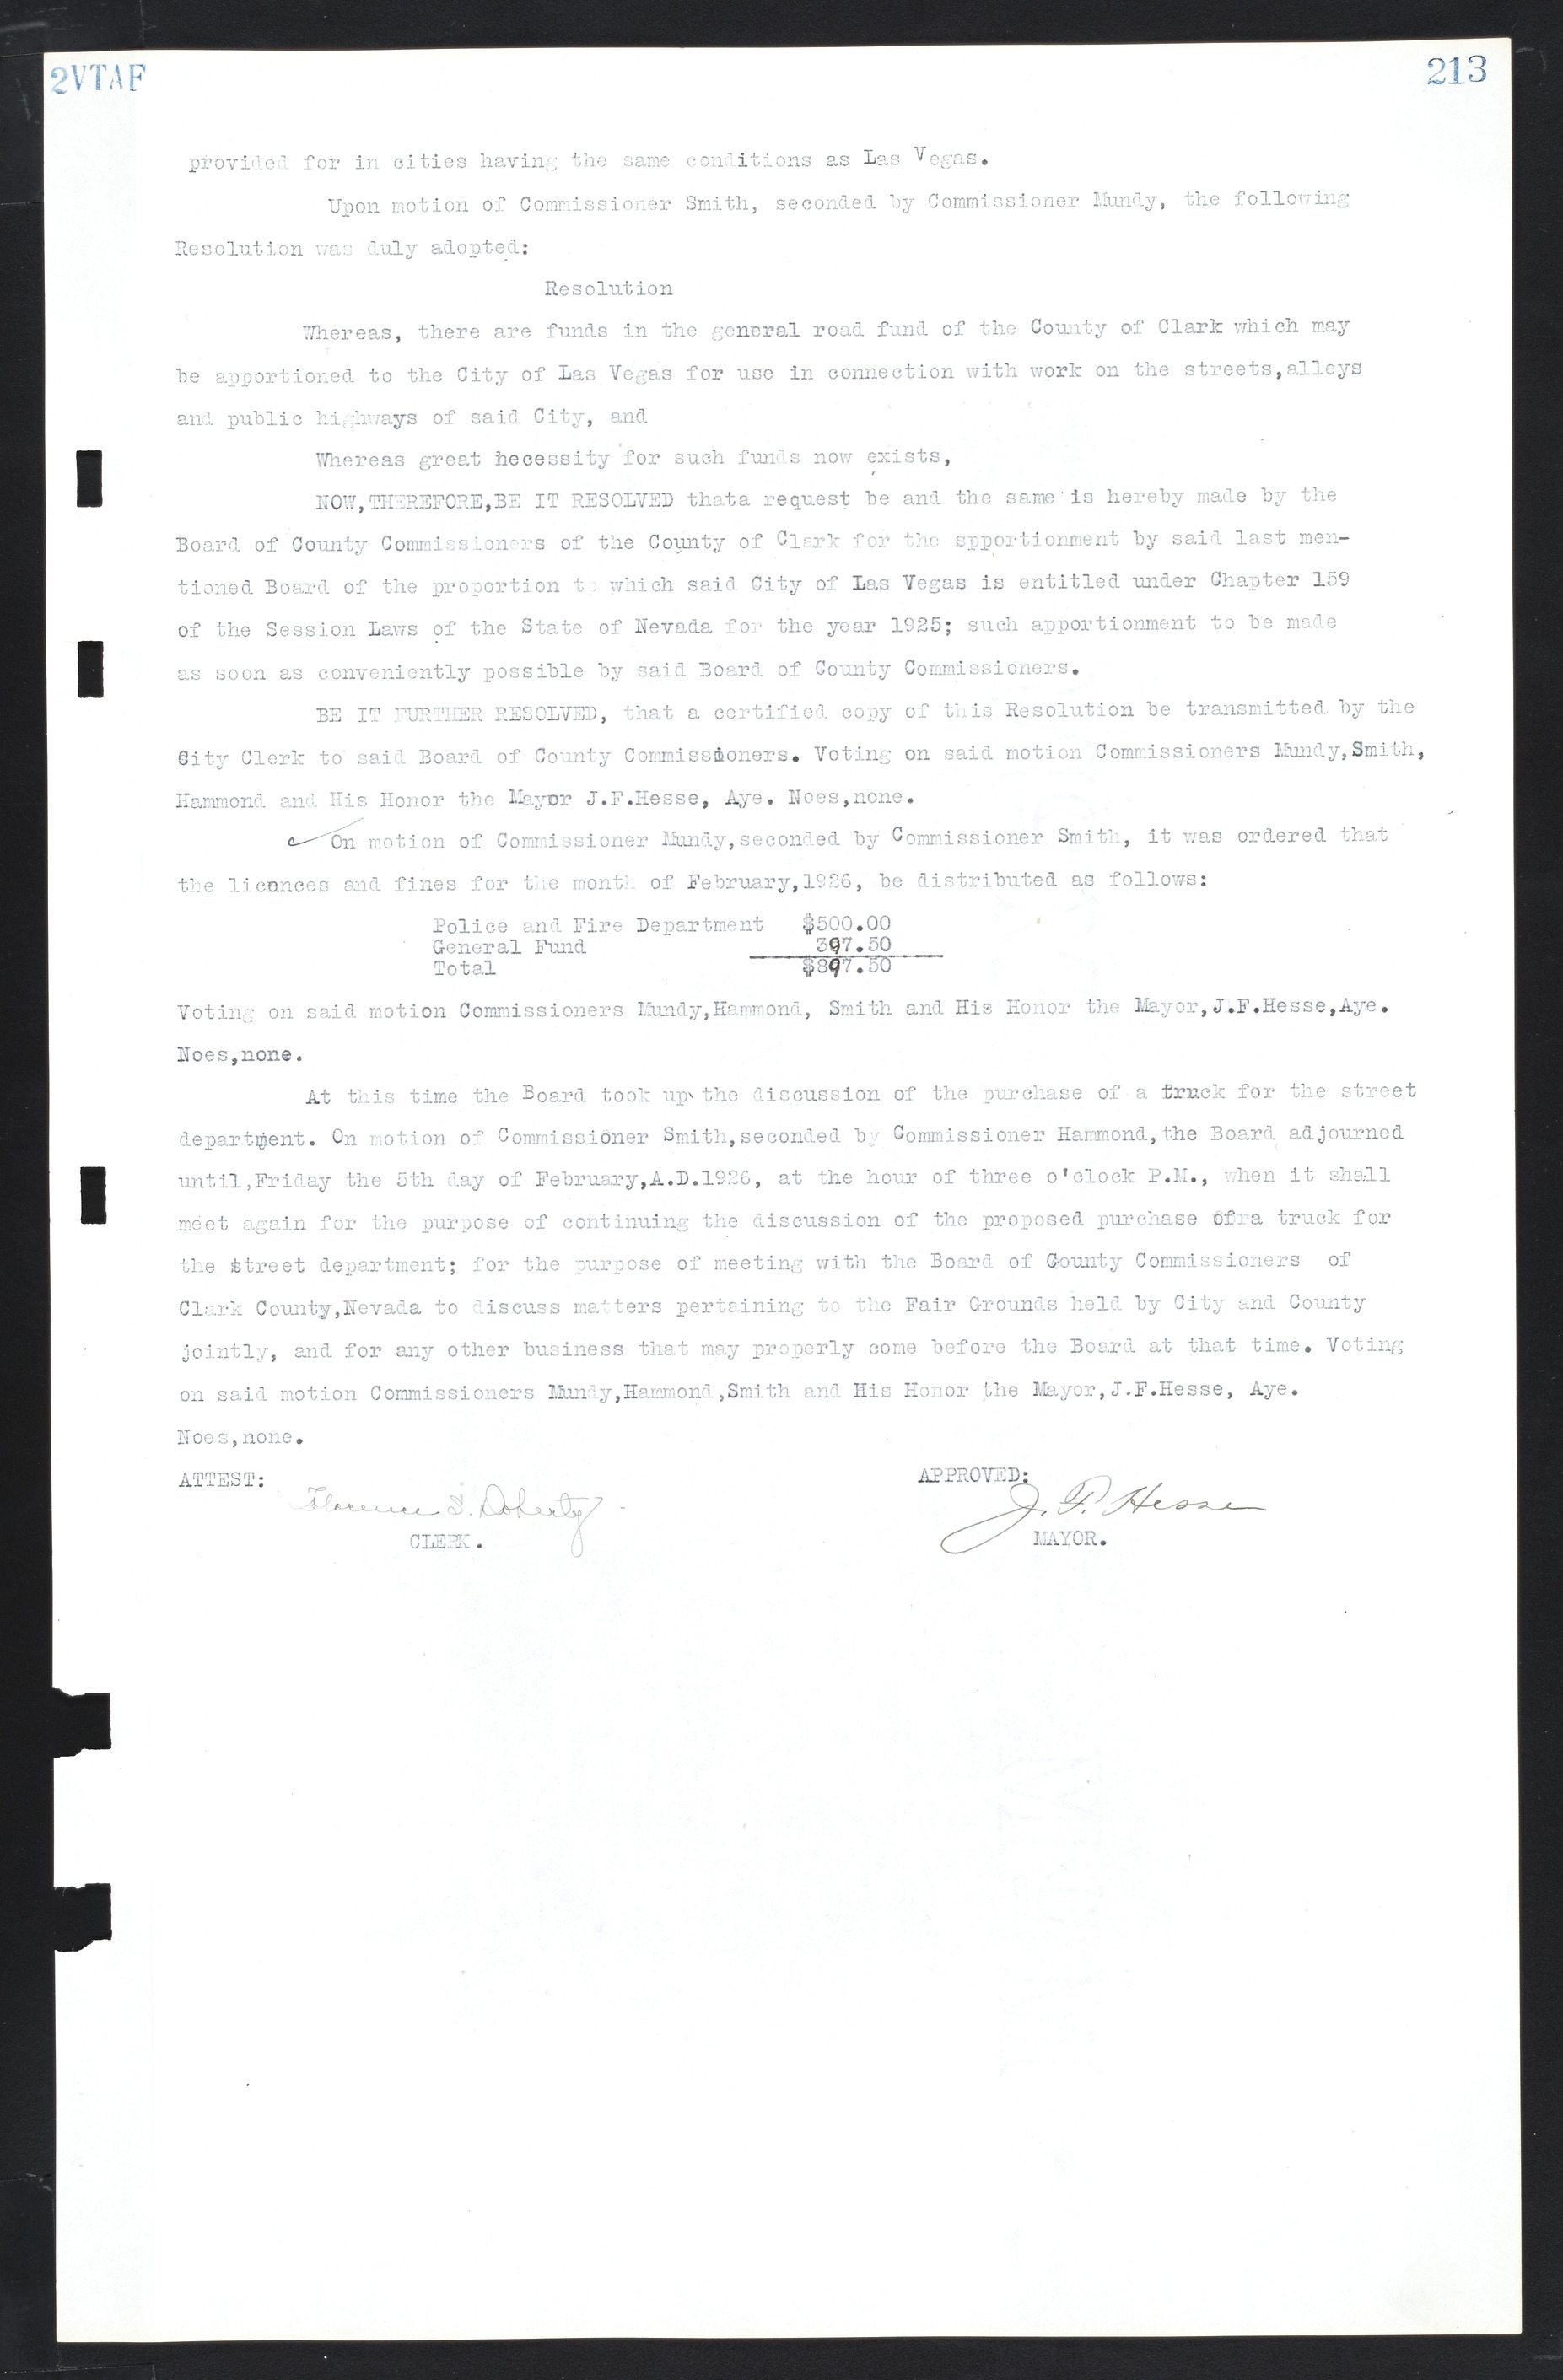 Las Vegas City Commission Minutes, March 1, 1922 to May 10, 1929, lvc000002-220